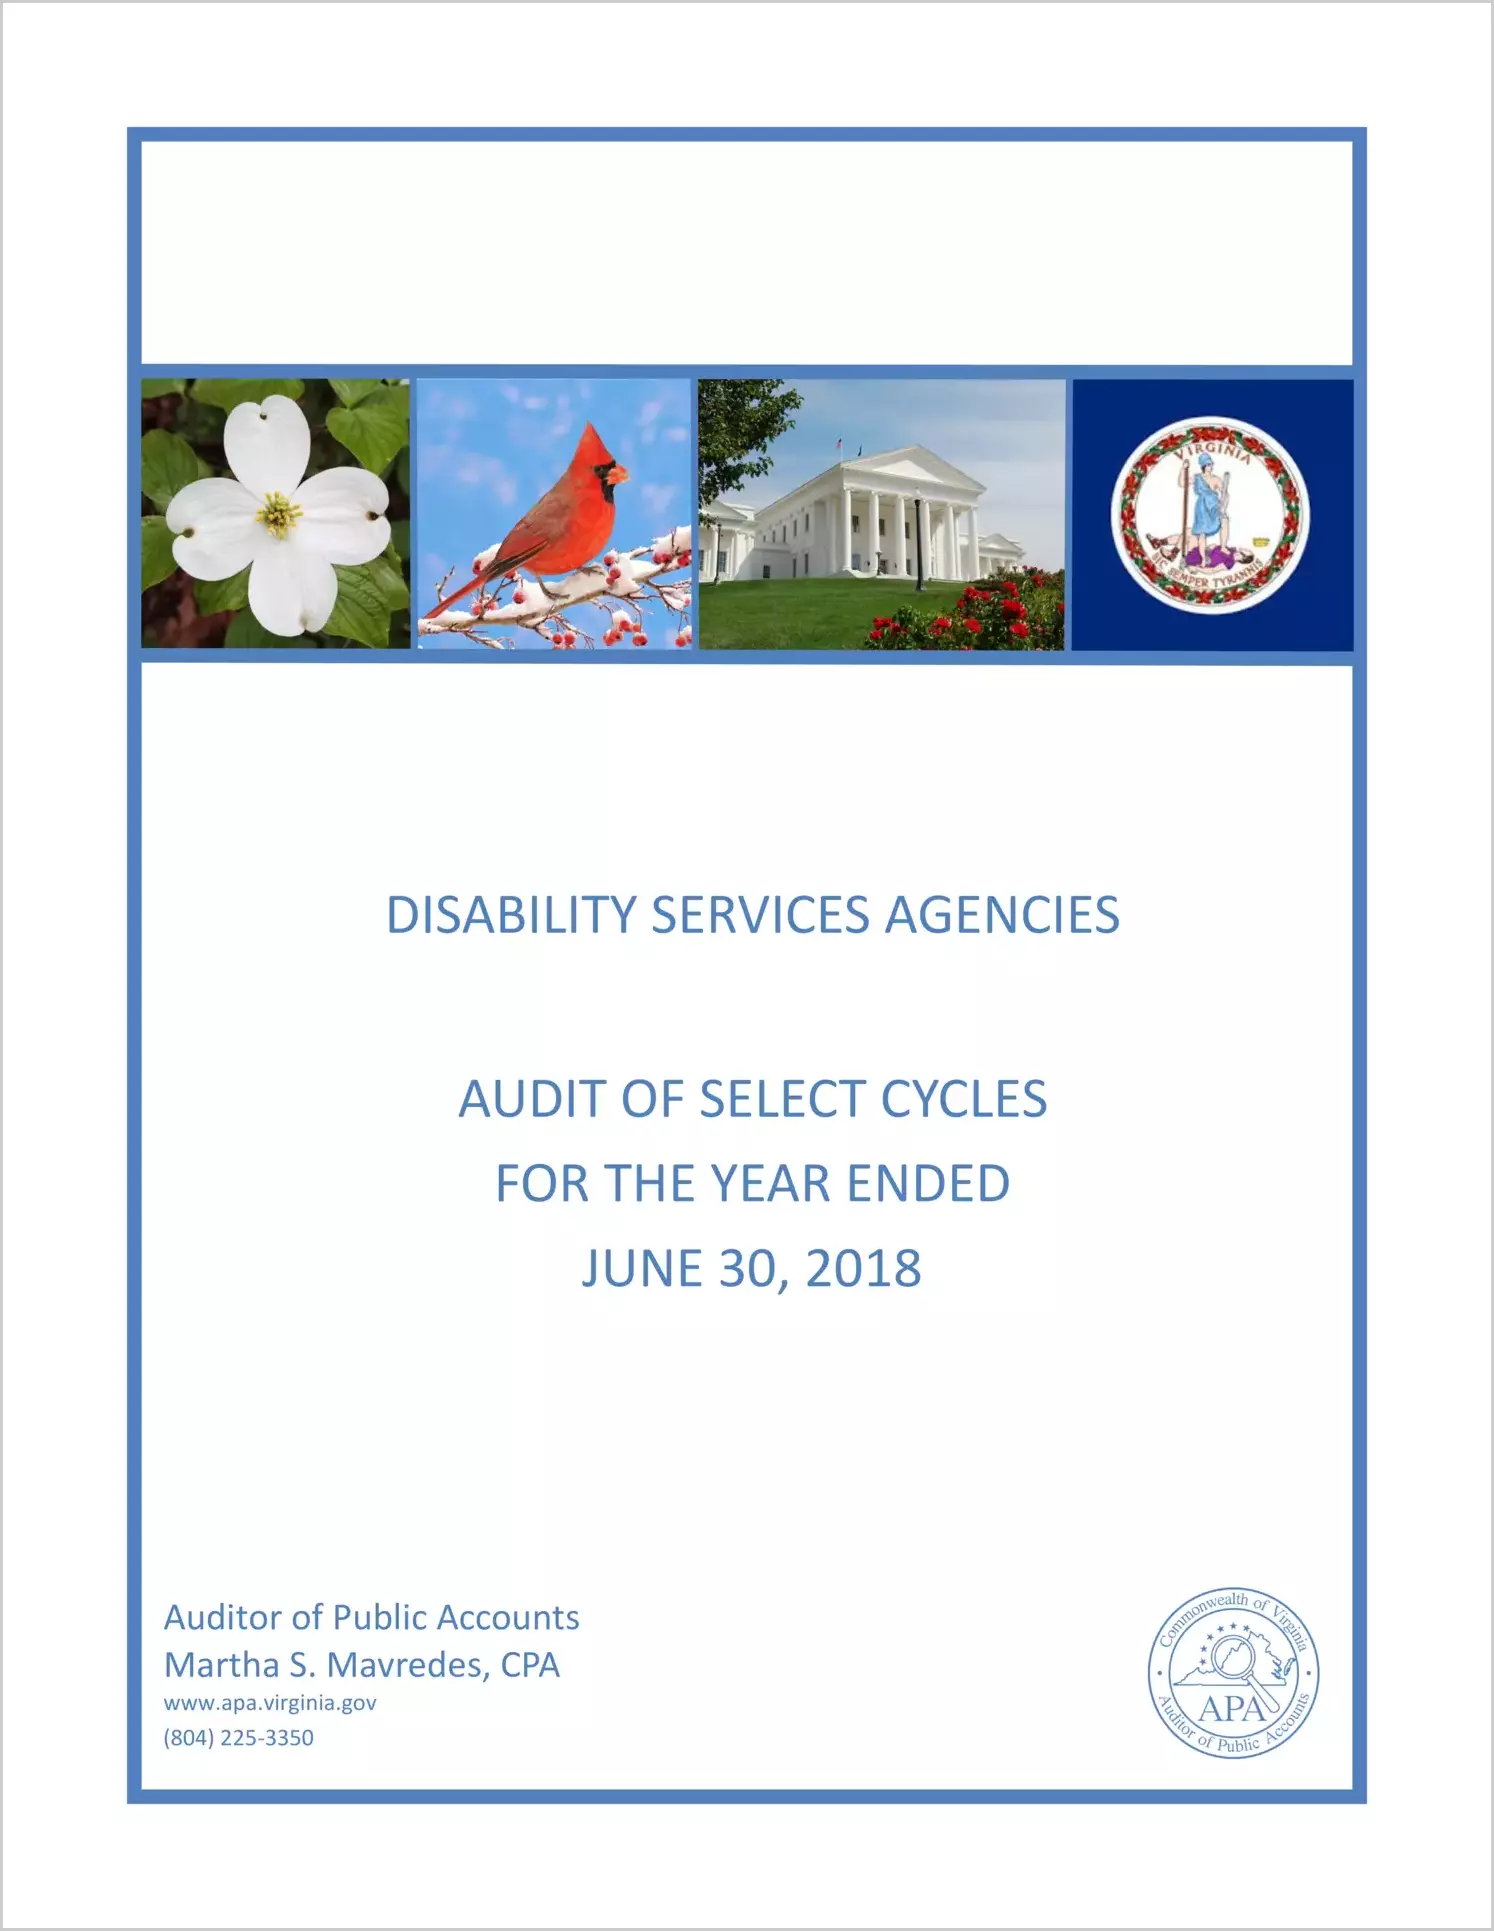 Disability Services Agencies Audit of Select Cycles for the year ended June 30, 2018